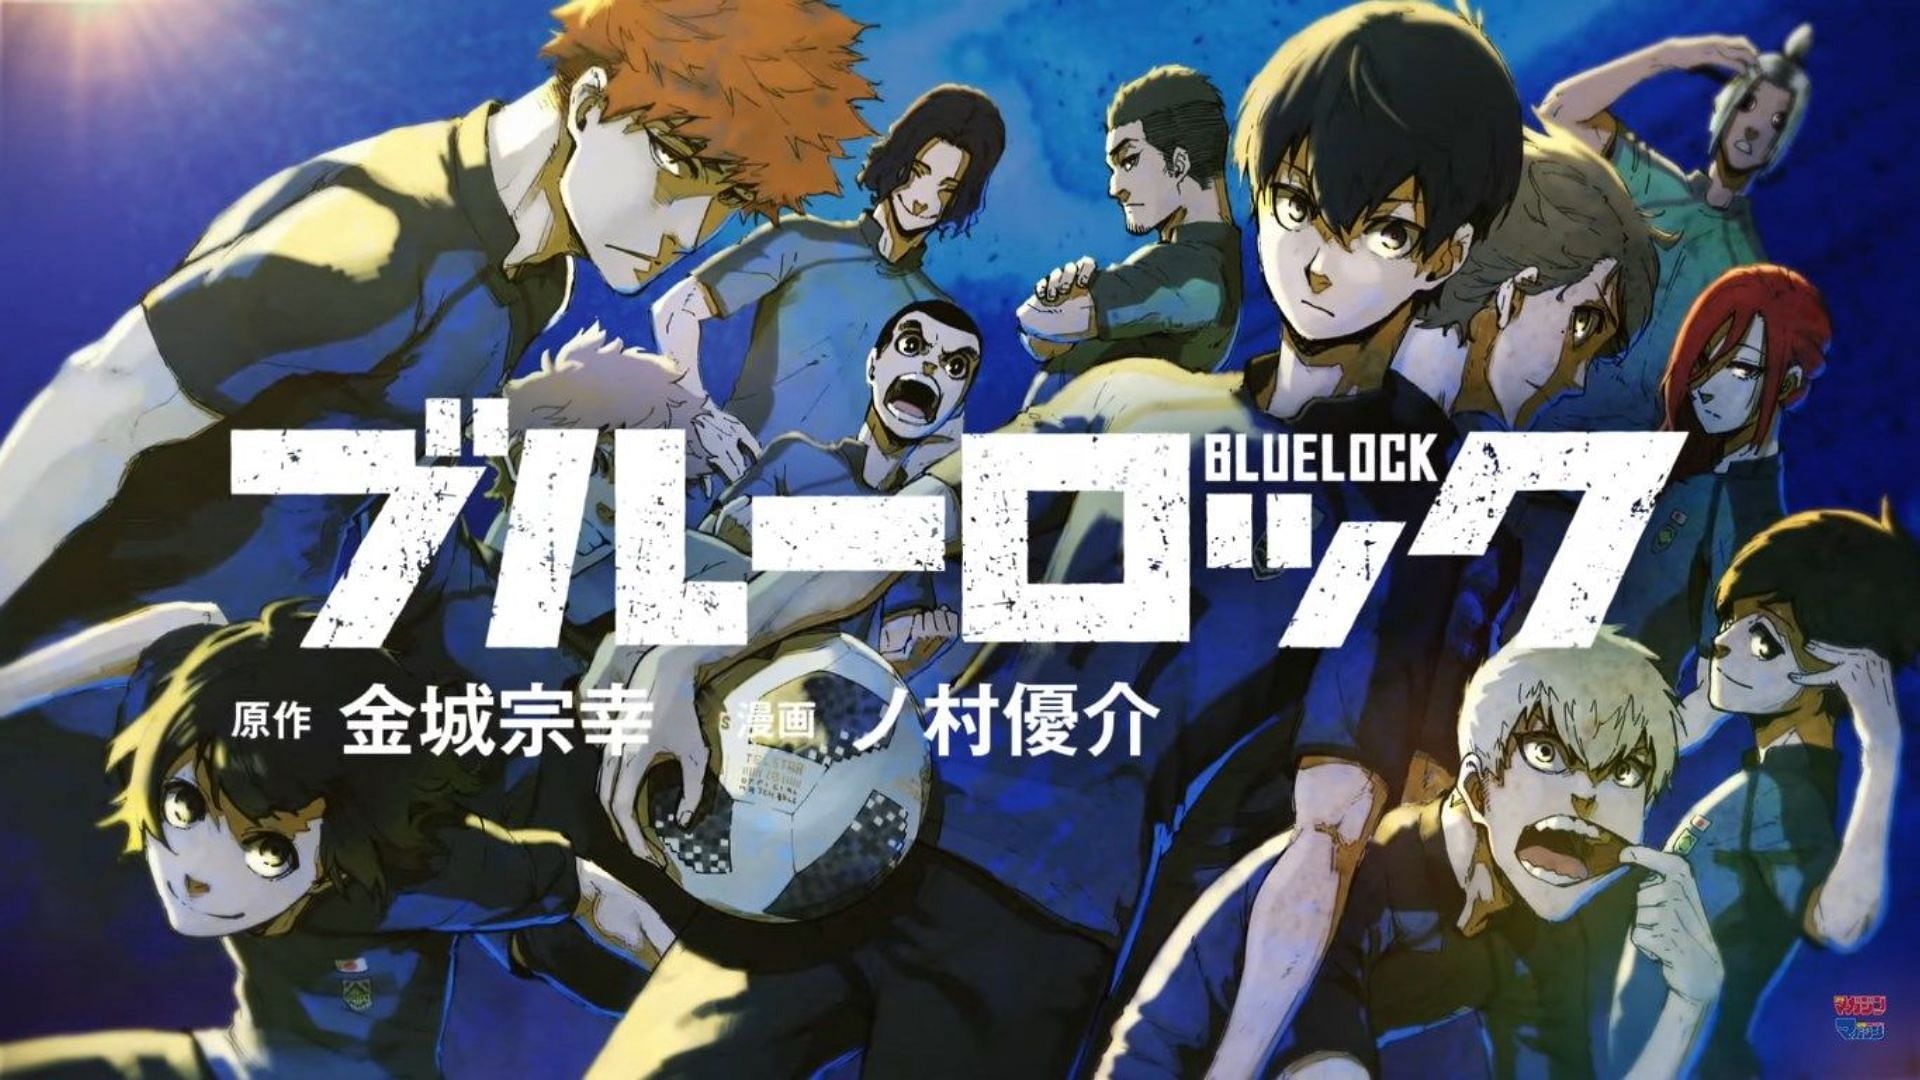 Blue Lock Confirms Release Date With New Trailer and Poster